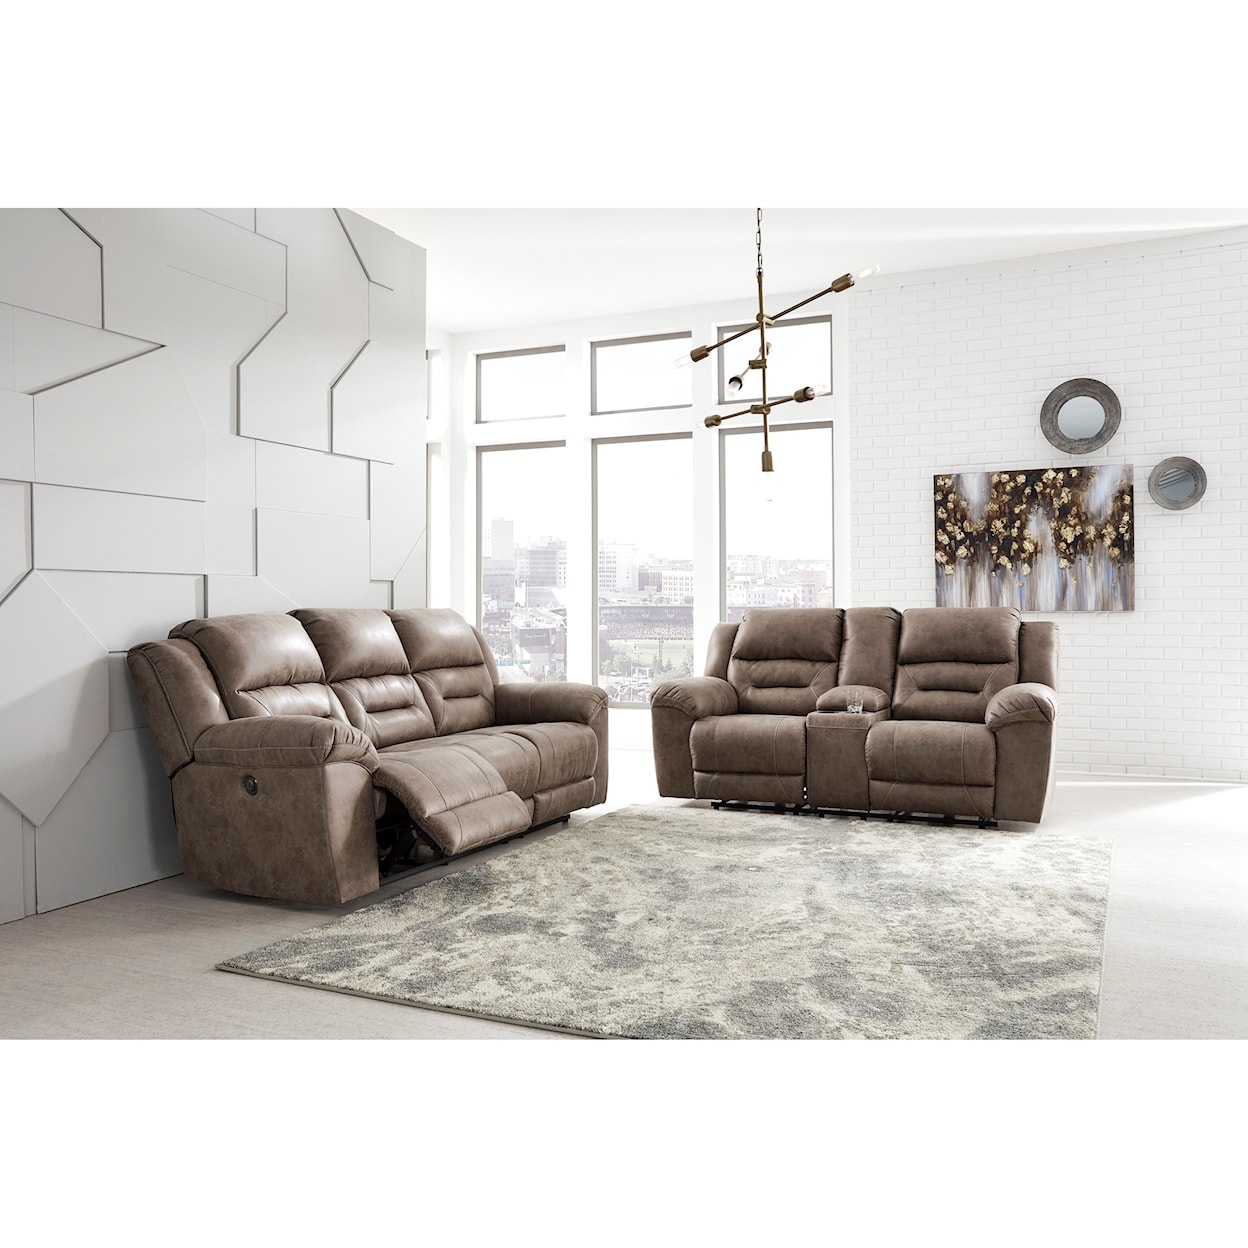 Signature Design by Ashley Stoneland Power Reclining Living Room Group